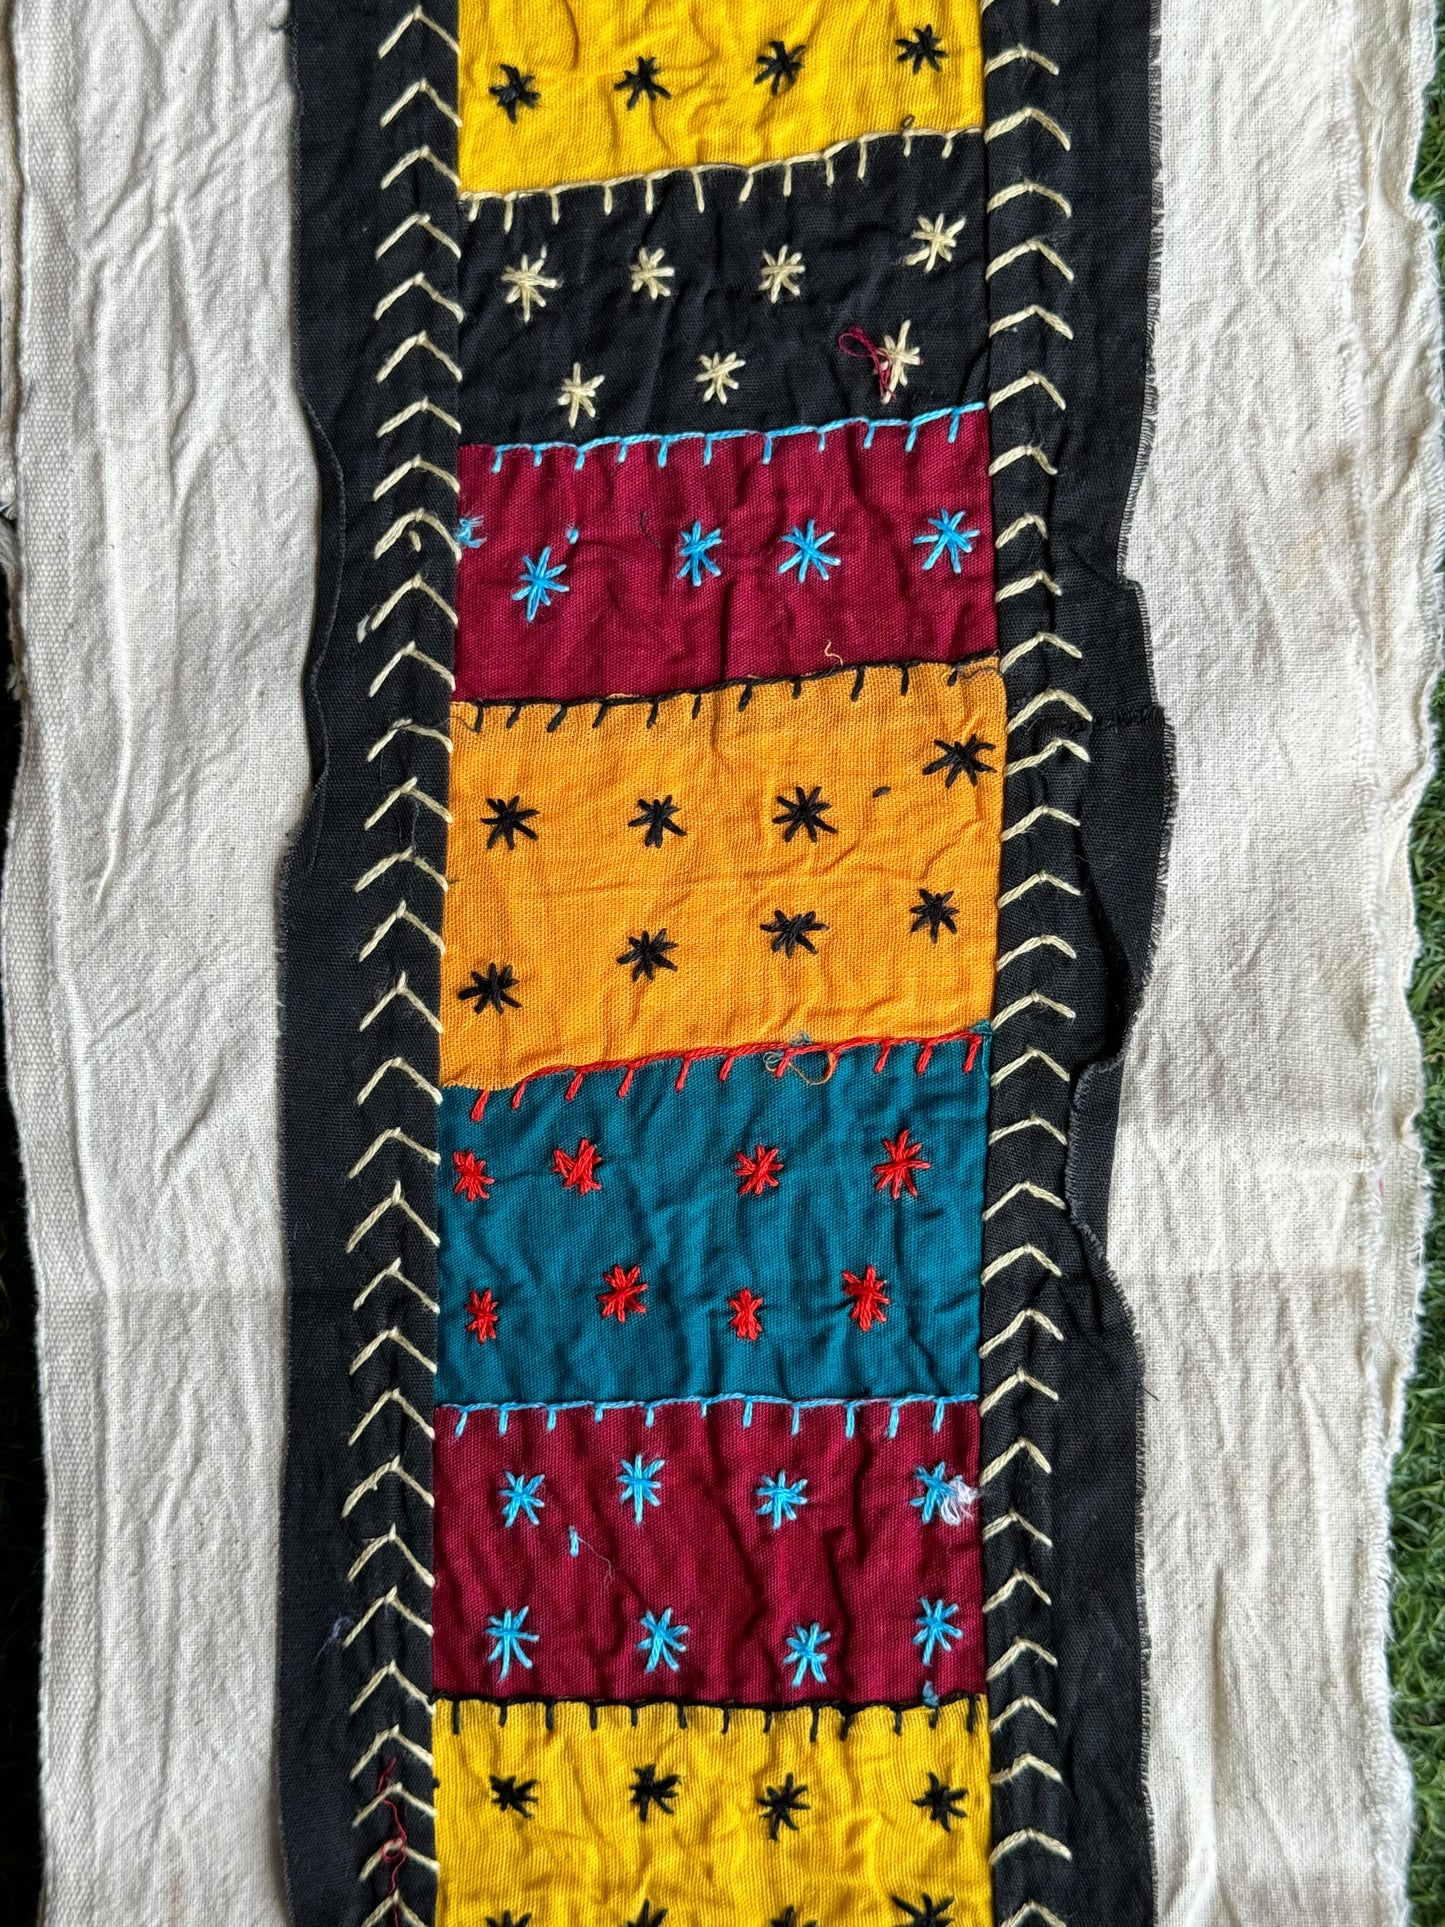 Black cotton border fabric with multi color patch work and hand embroidery